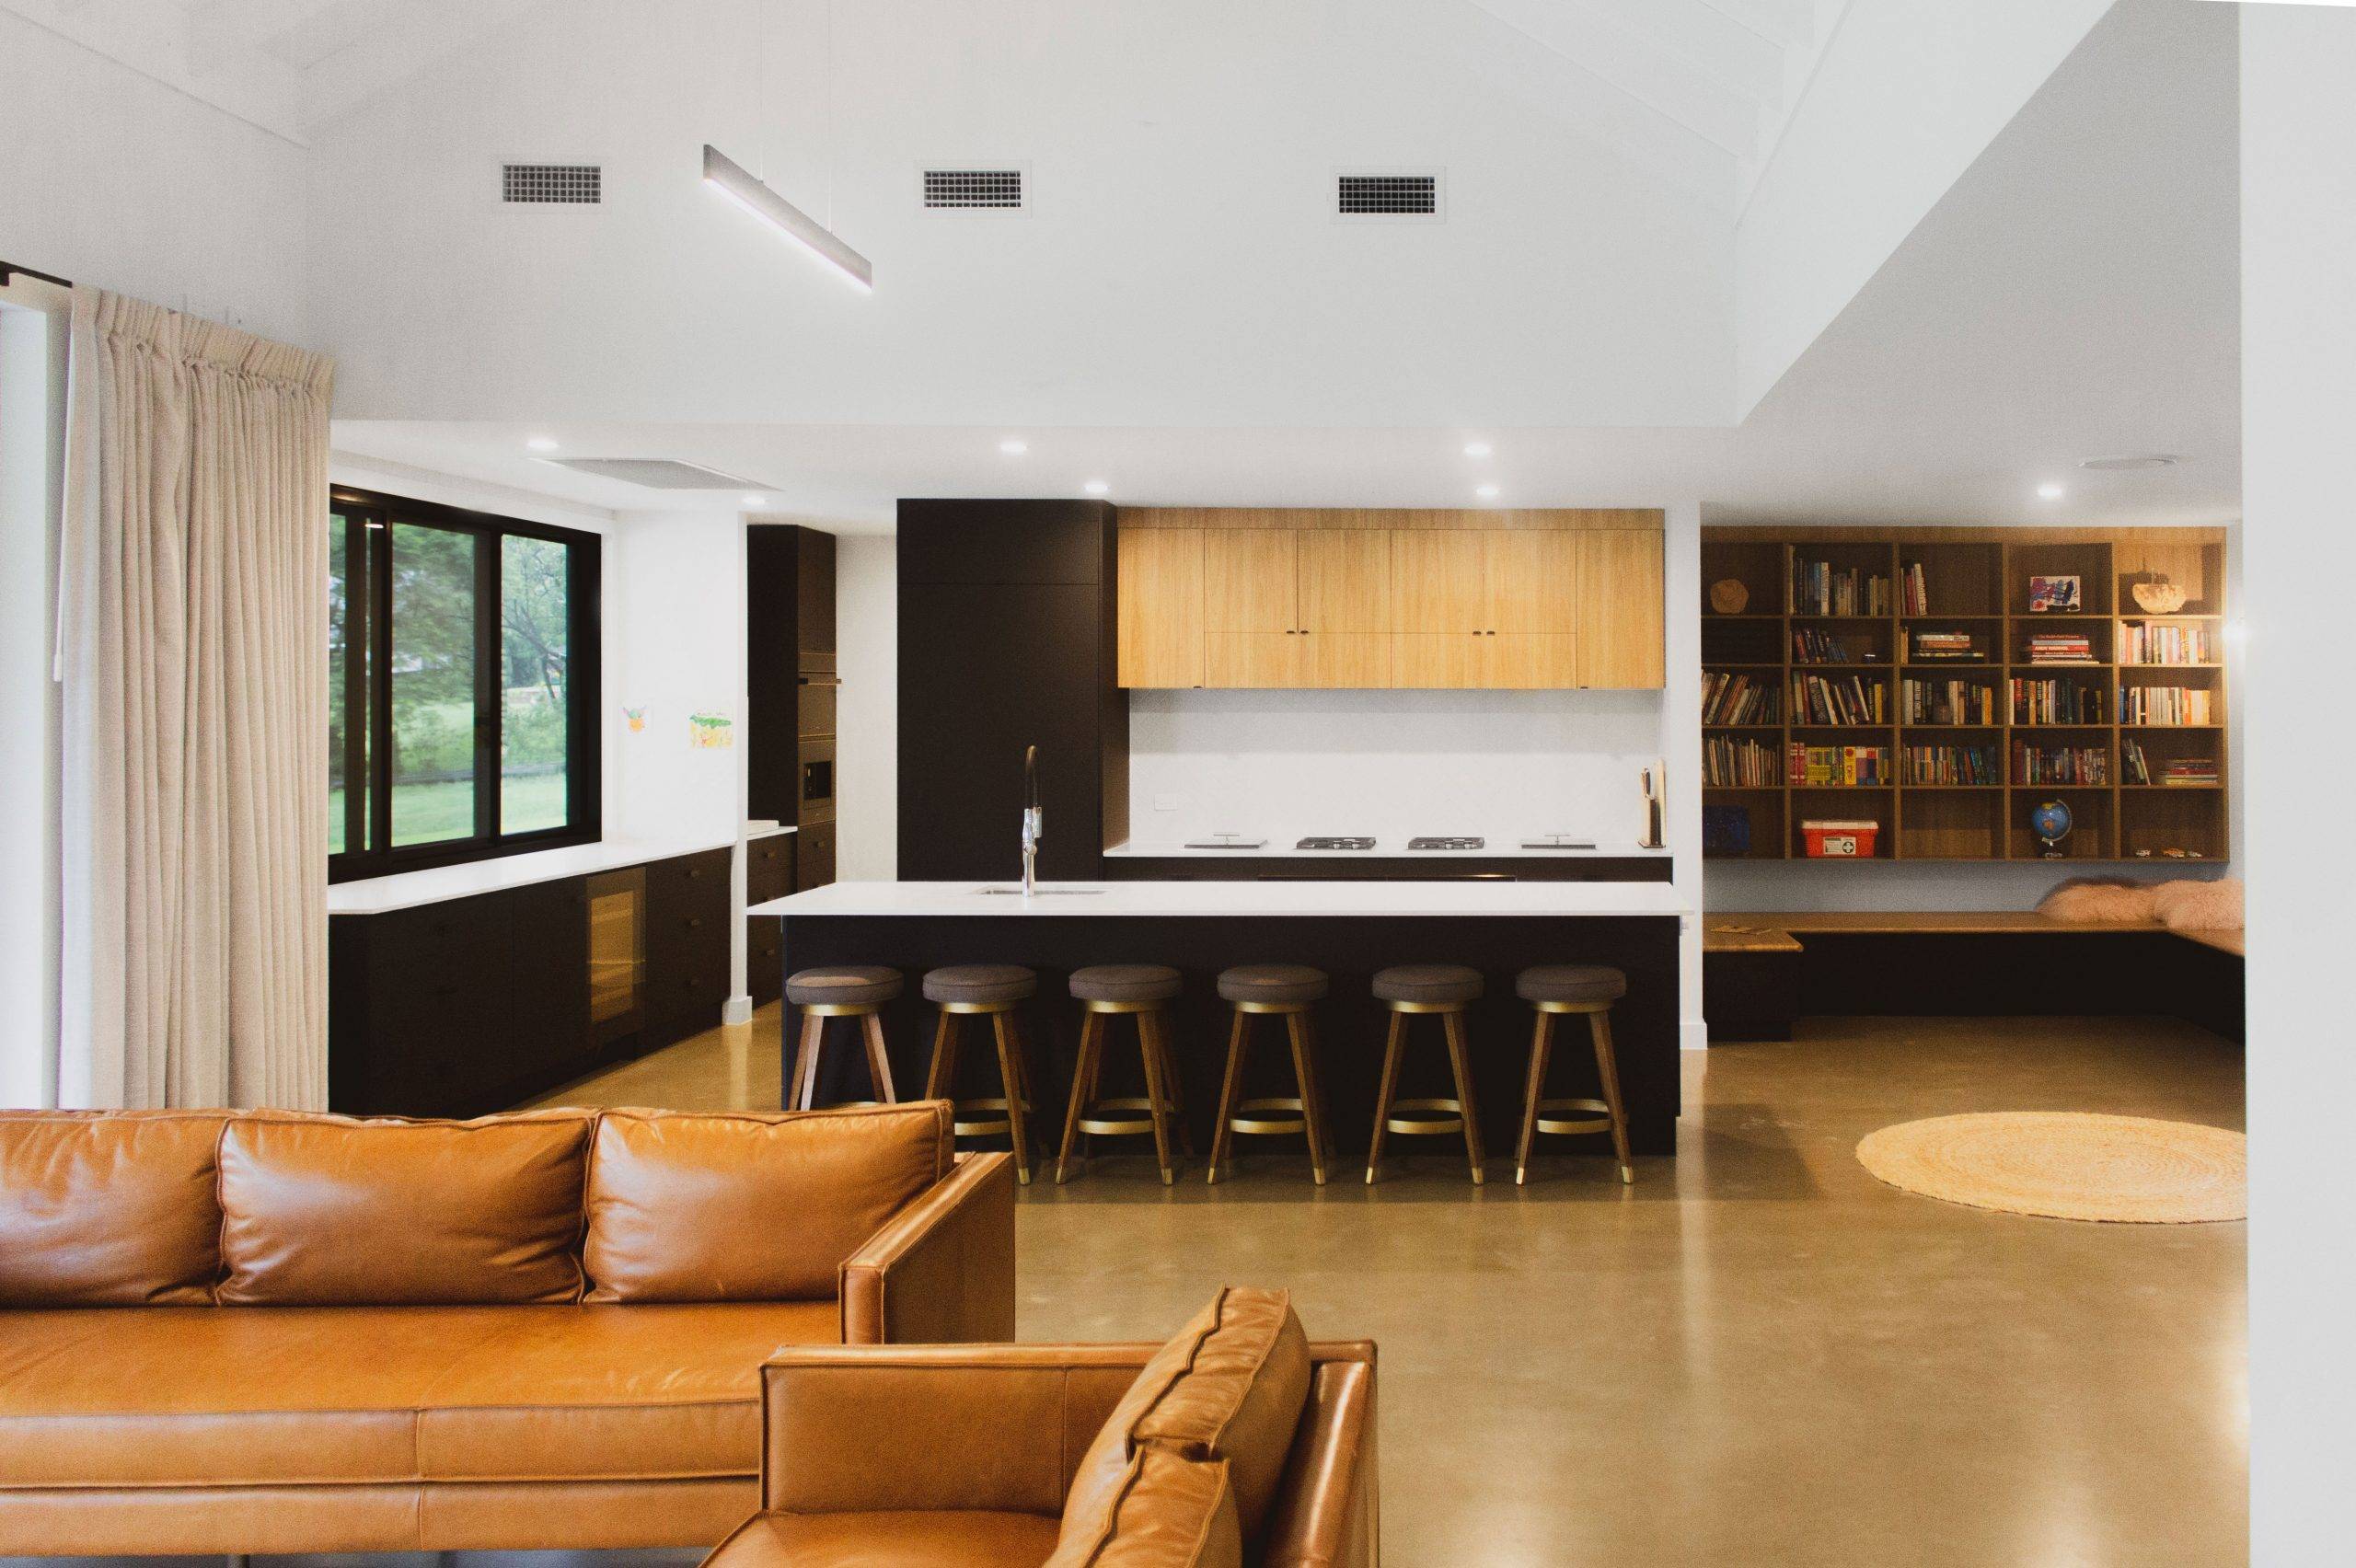 Flourish Architecture Cantwell Street Cantwell St Architect designed contemporary farmhouse style home, High raked ceilings with exposed rafters, Large covered outdoor spaces, Minimalist material palette of polished concrete, stained timber, exposed brick and white paint.